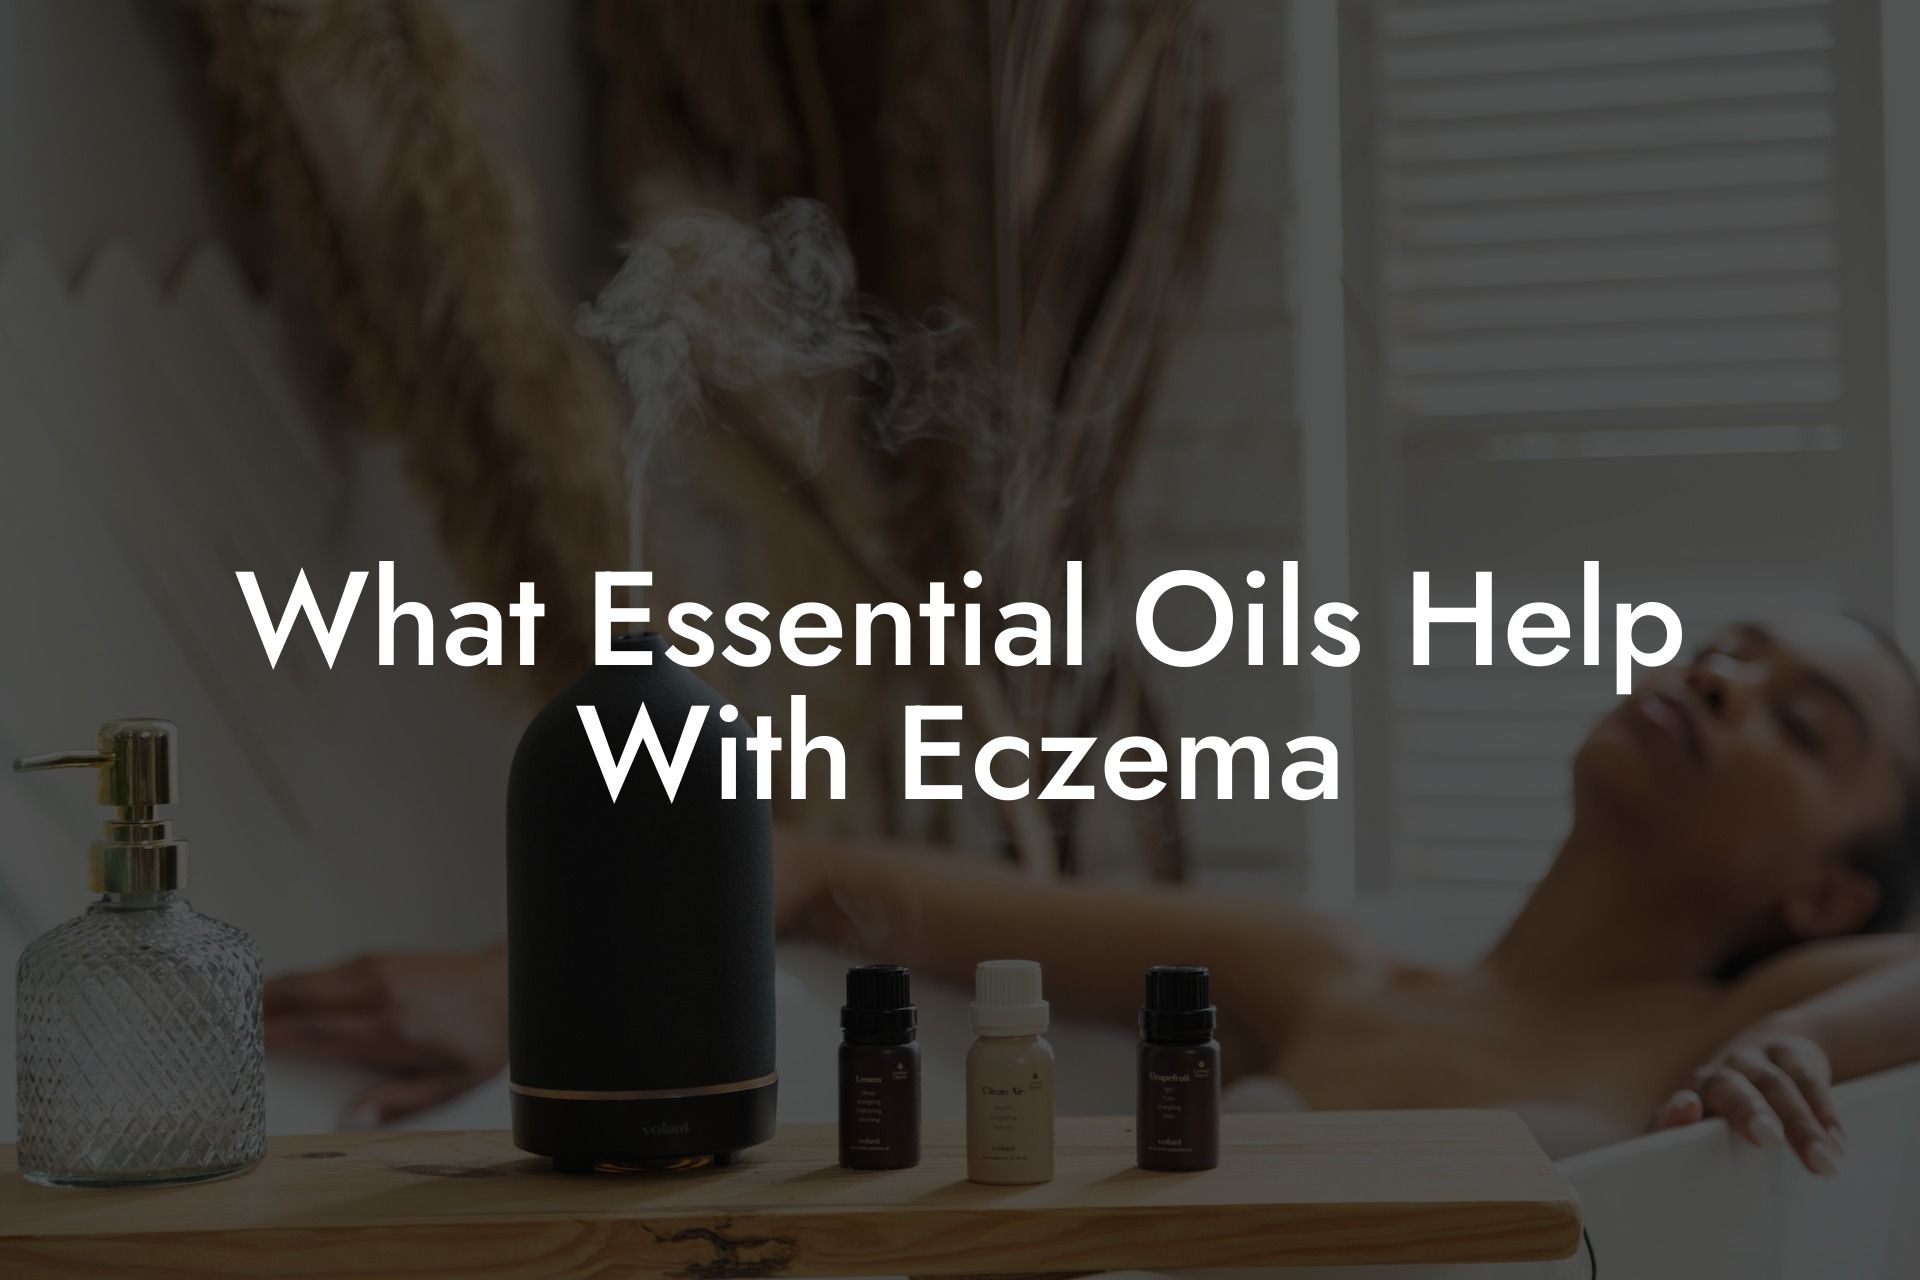 What Essential Oils Help With Eczema